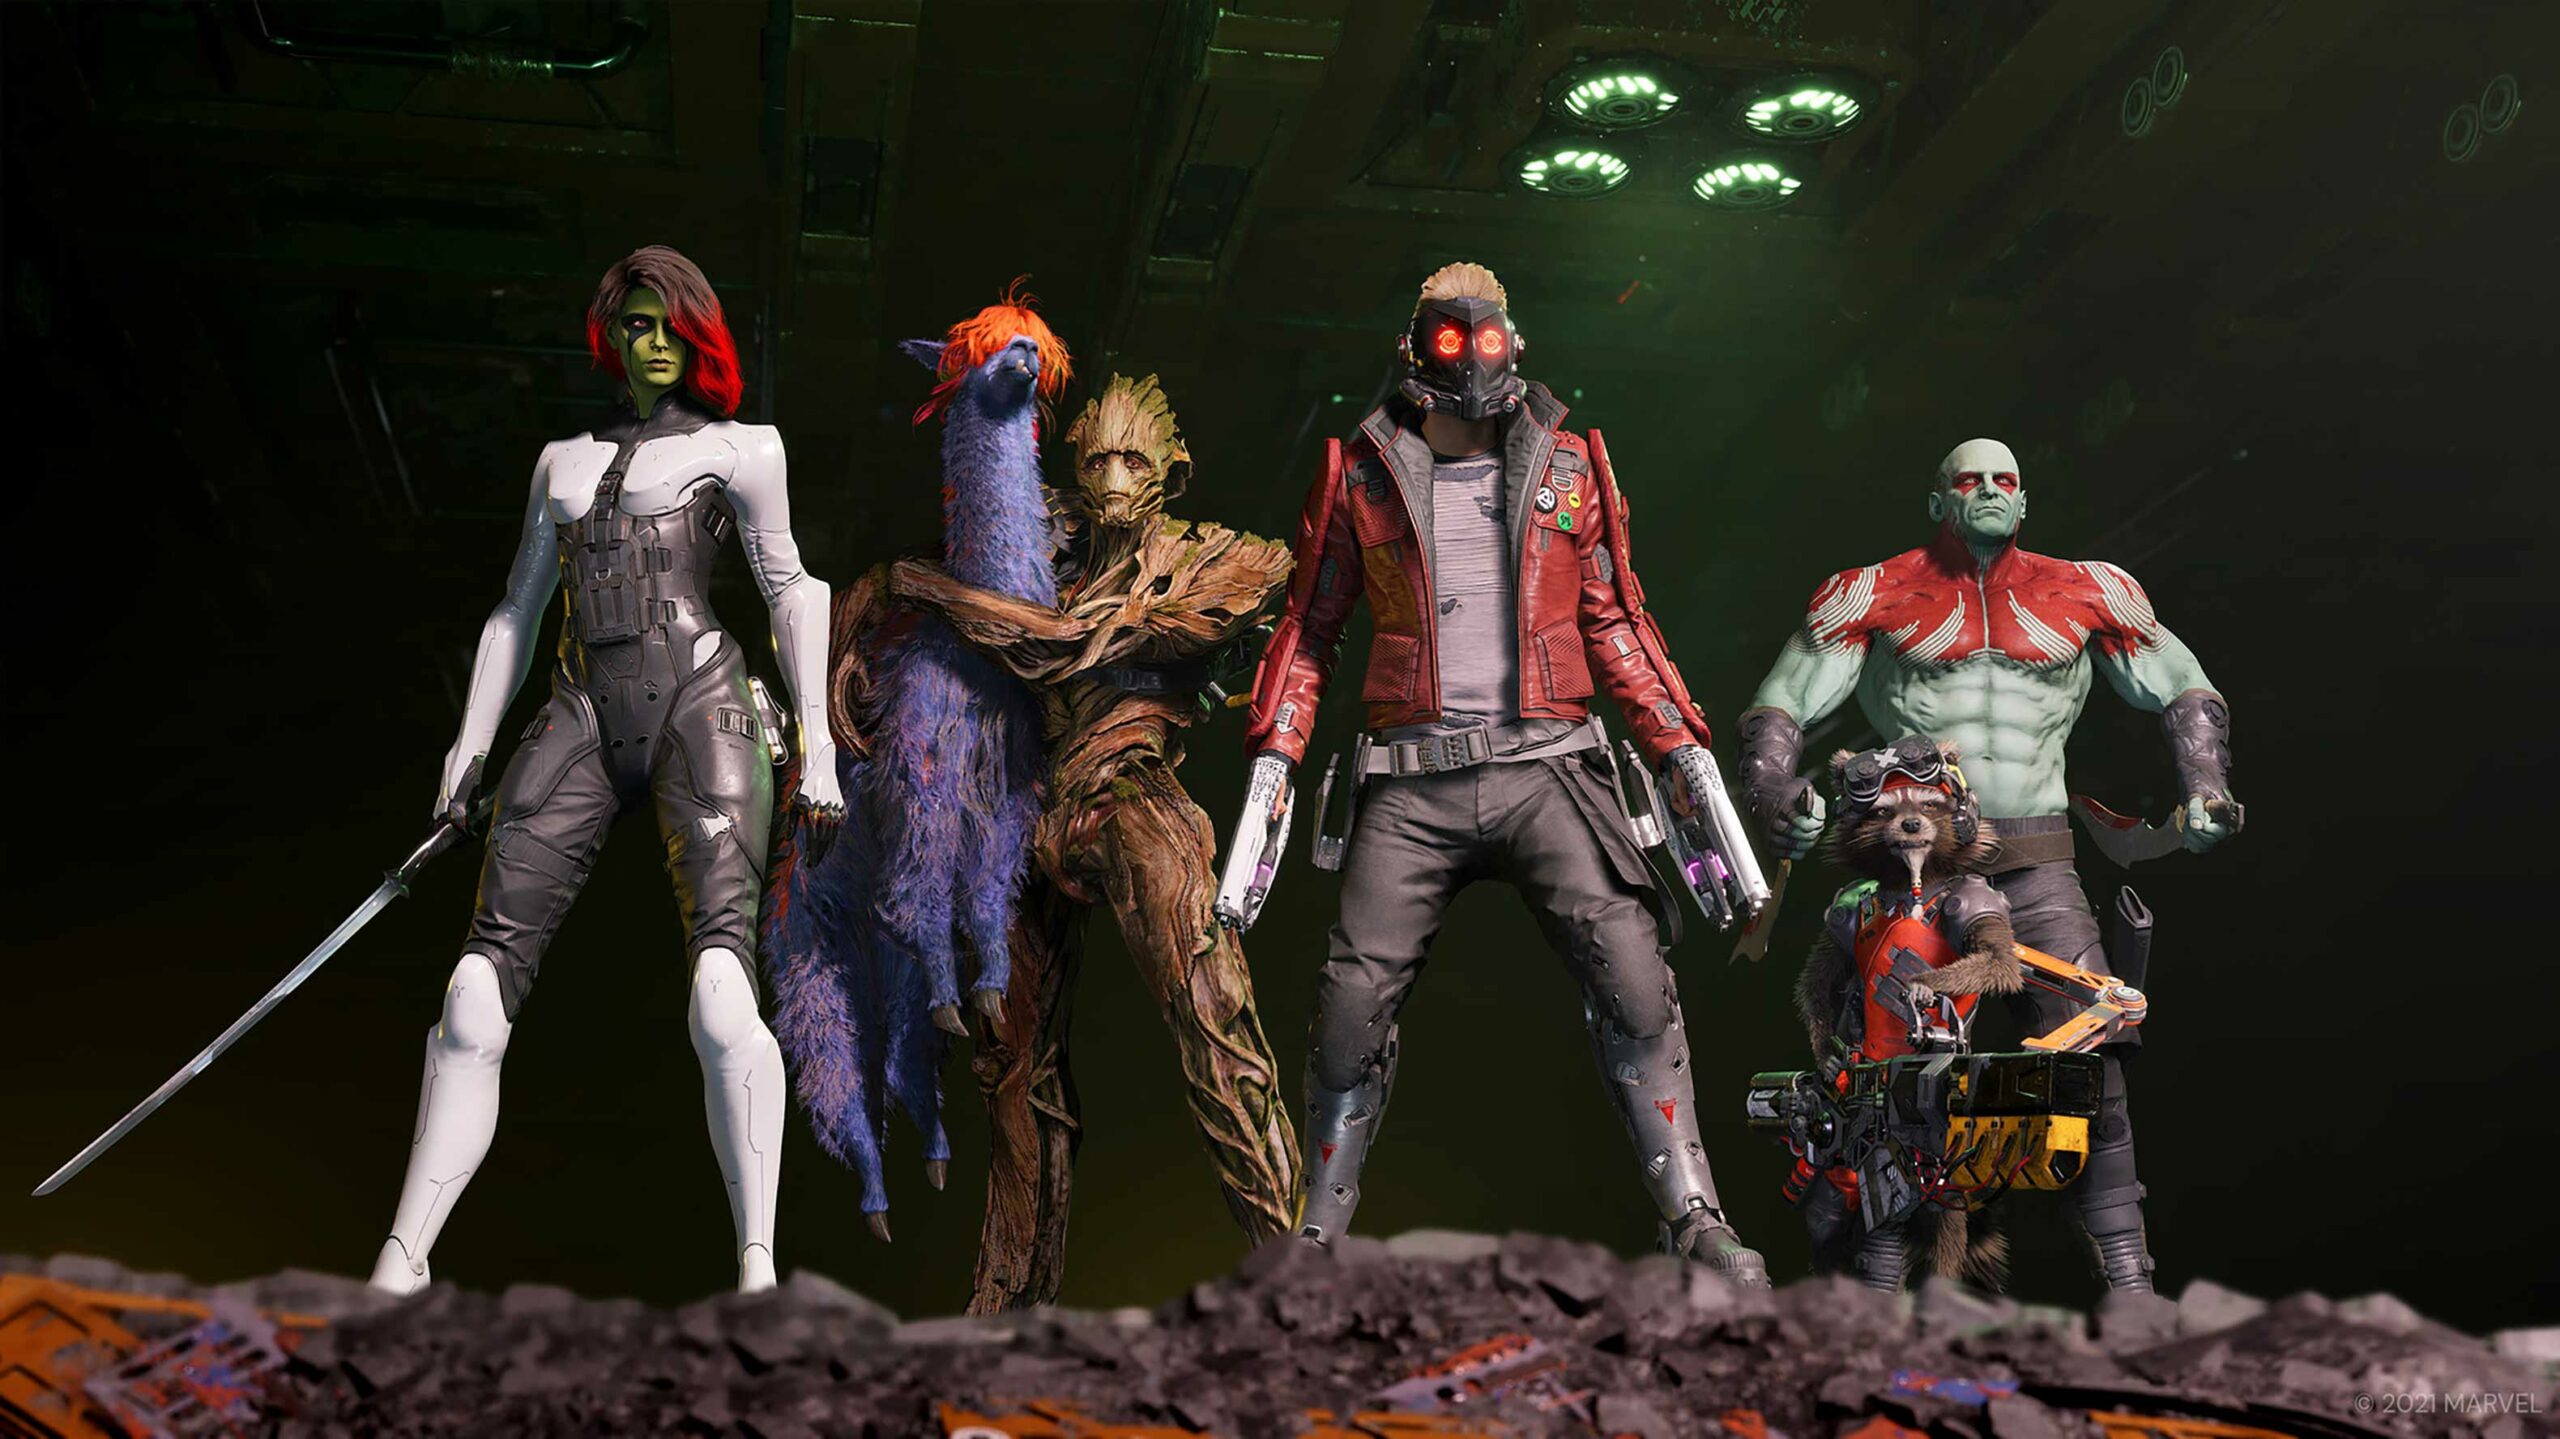 Gamora, Groot holding a llama, Star-Lord, Rocket and Drax stand in a row in Marvel's Guardians of the Galaxy.